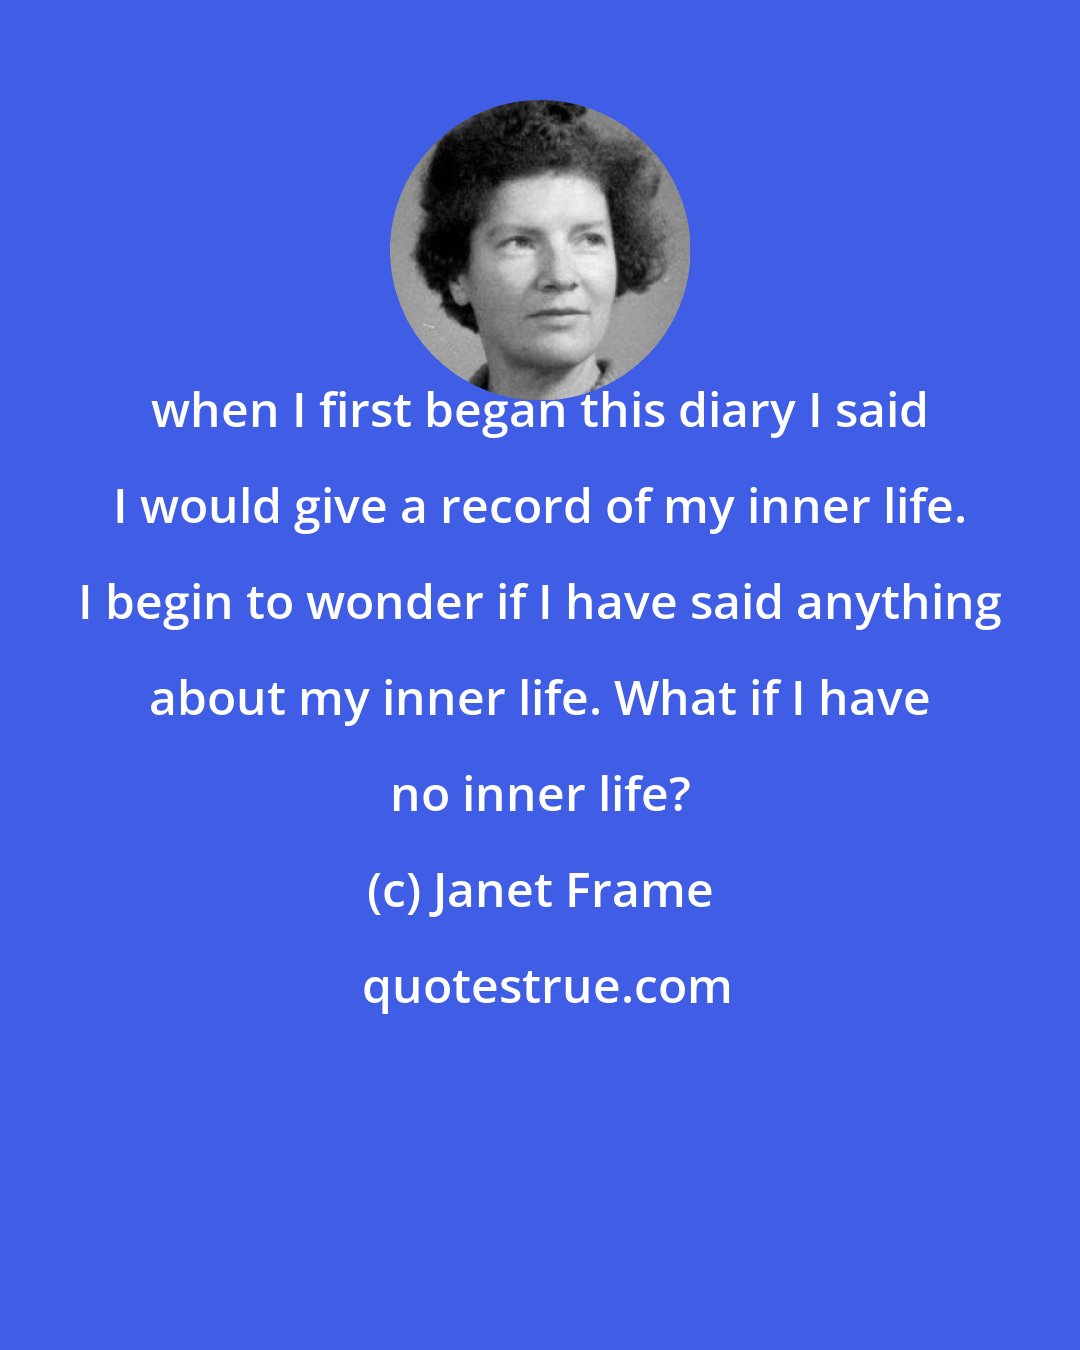 Janet Frame: when I first began this diary I said I would give a record of my inner life. I begin to wonder if I have said anything about my inner life. What if I have no inner life?